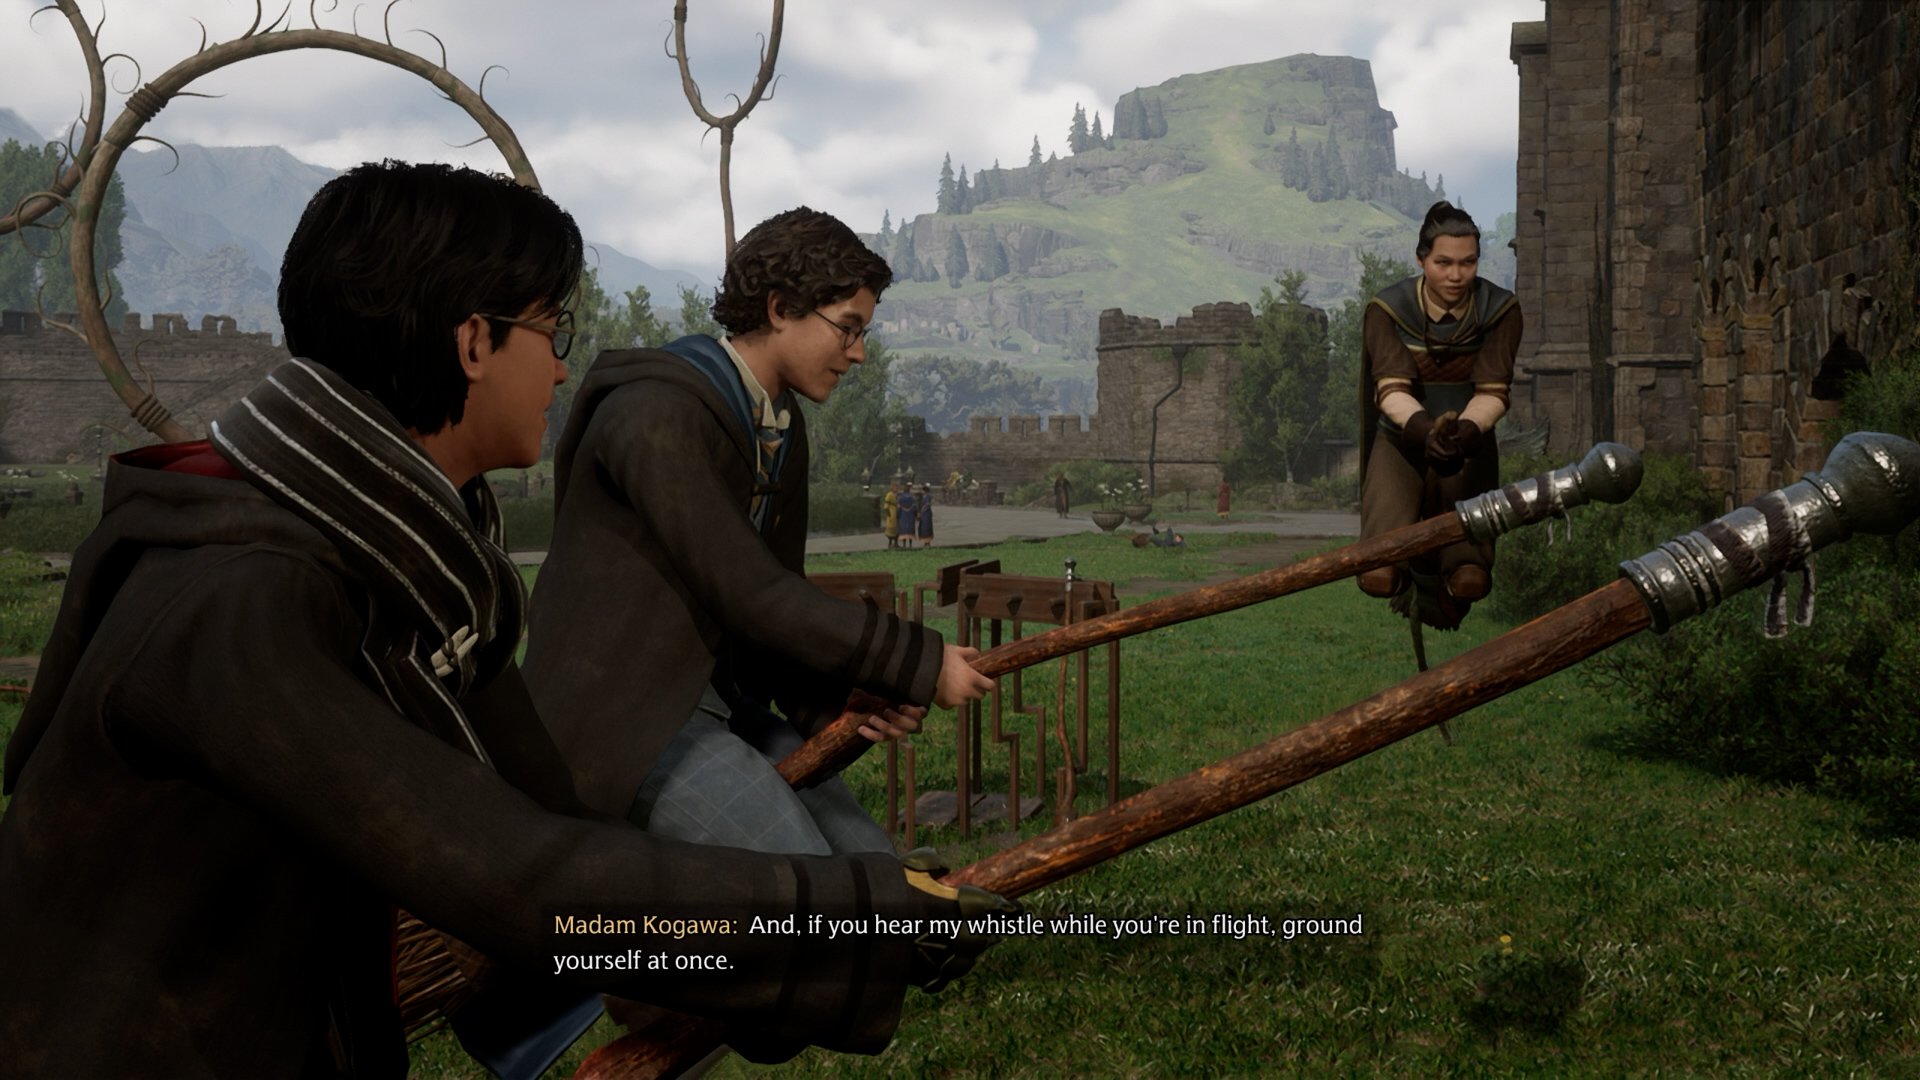 New Hogwarts Legacy Gameplay Shows Spell Combat, Broomstick Flight, And More